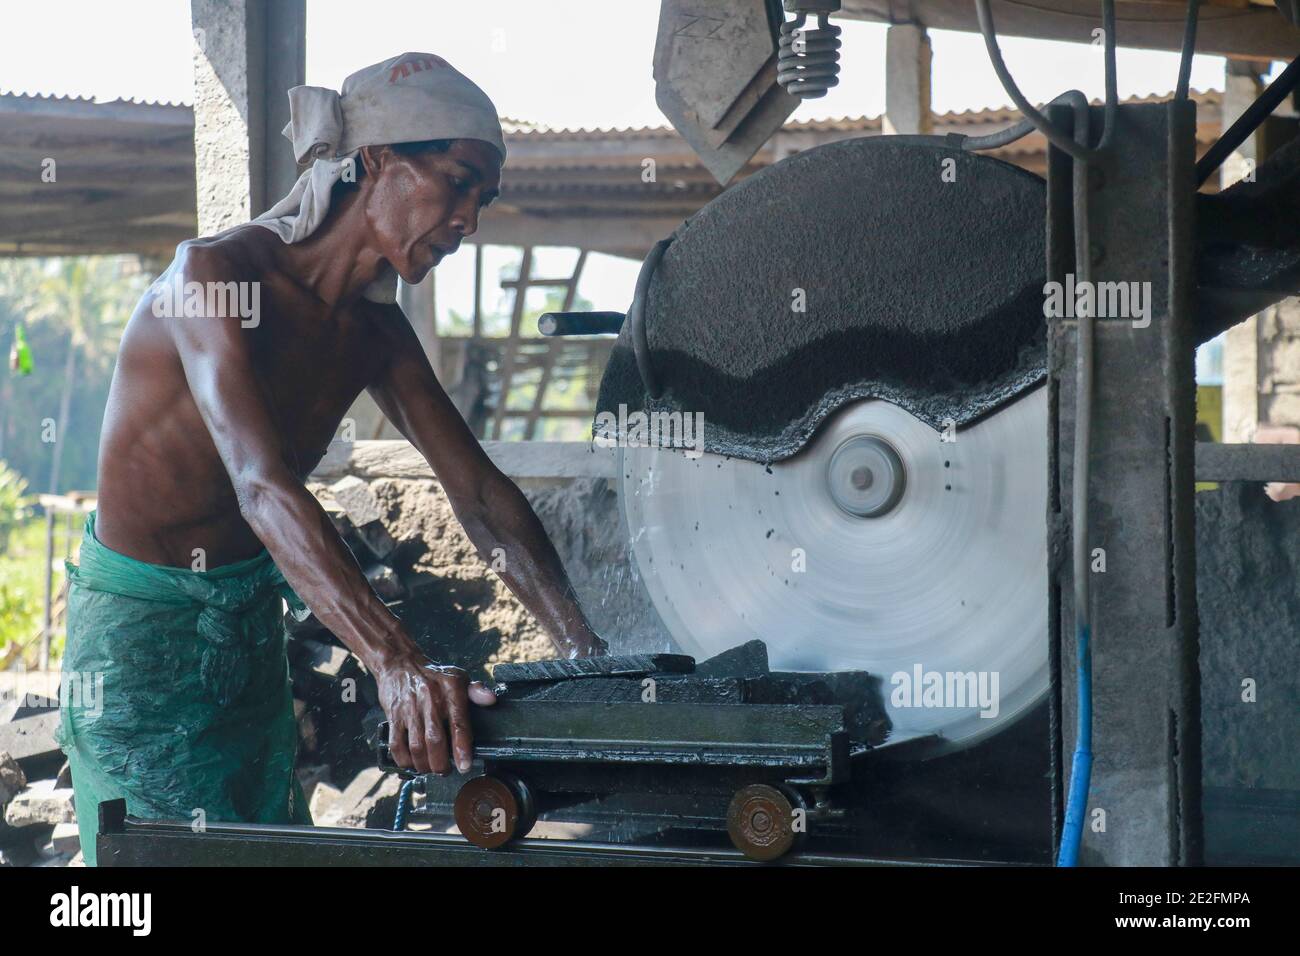 A man cuts a black volcanic stone with a water jet cutting machine, Bali, Indonesia Stock Photo